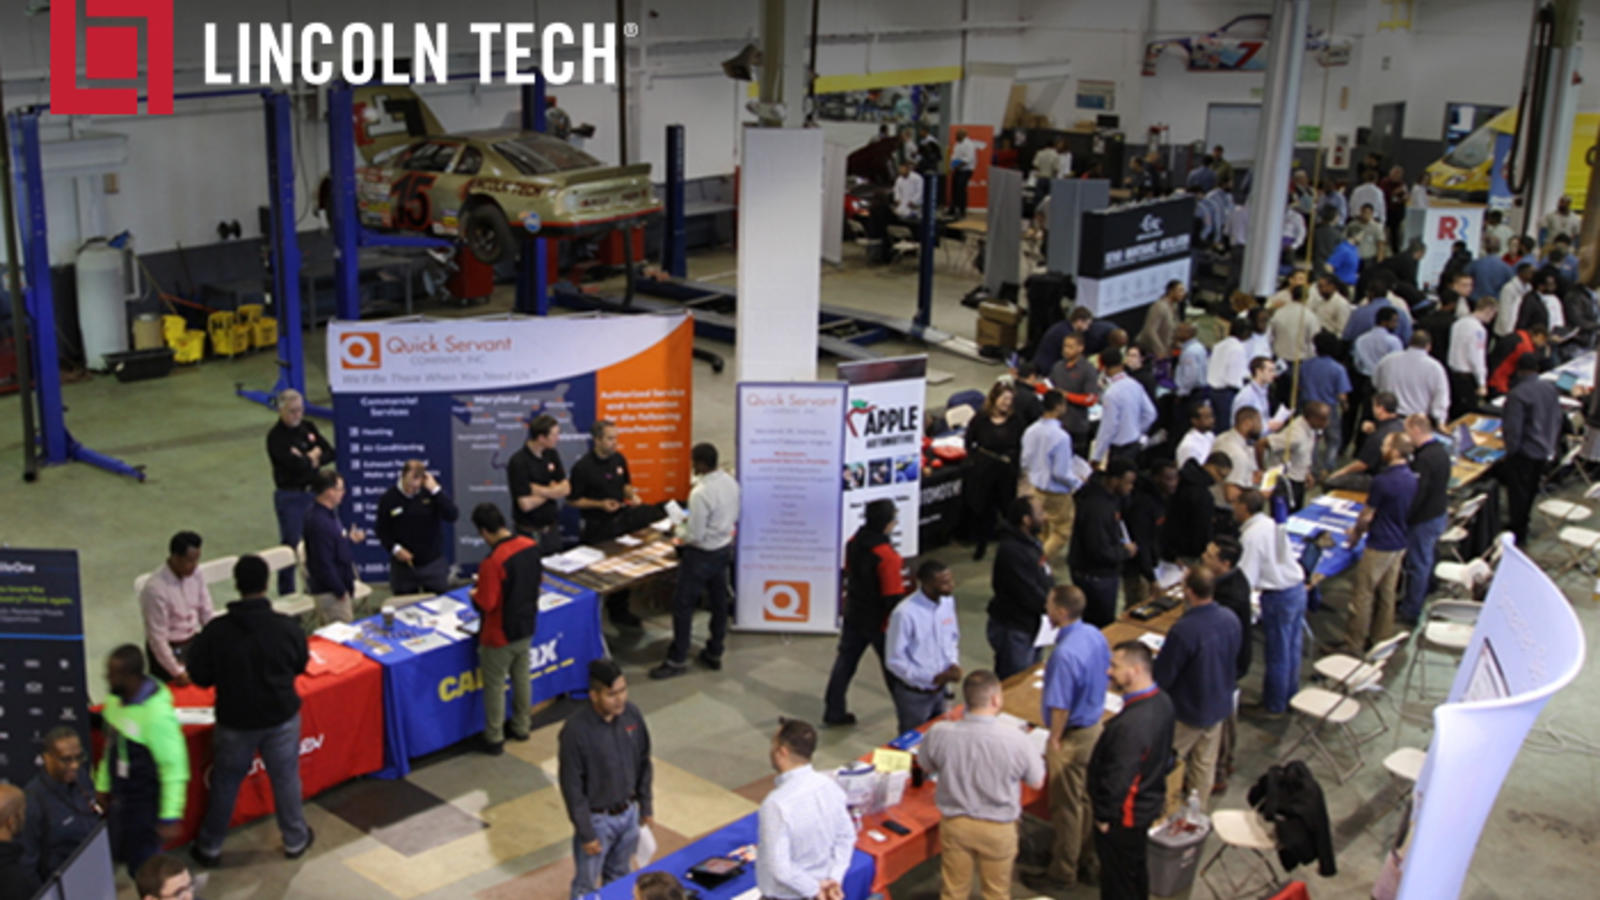 Lincoln Tech Career Fairs Connect Students, Employers